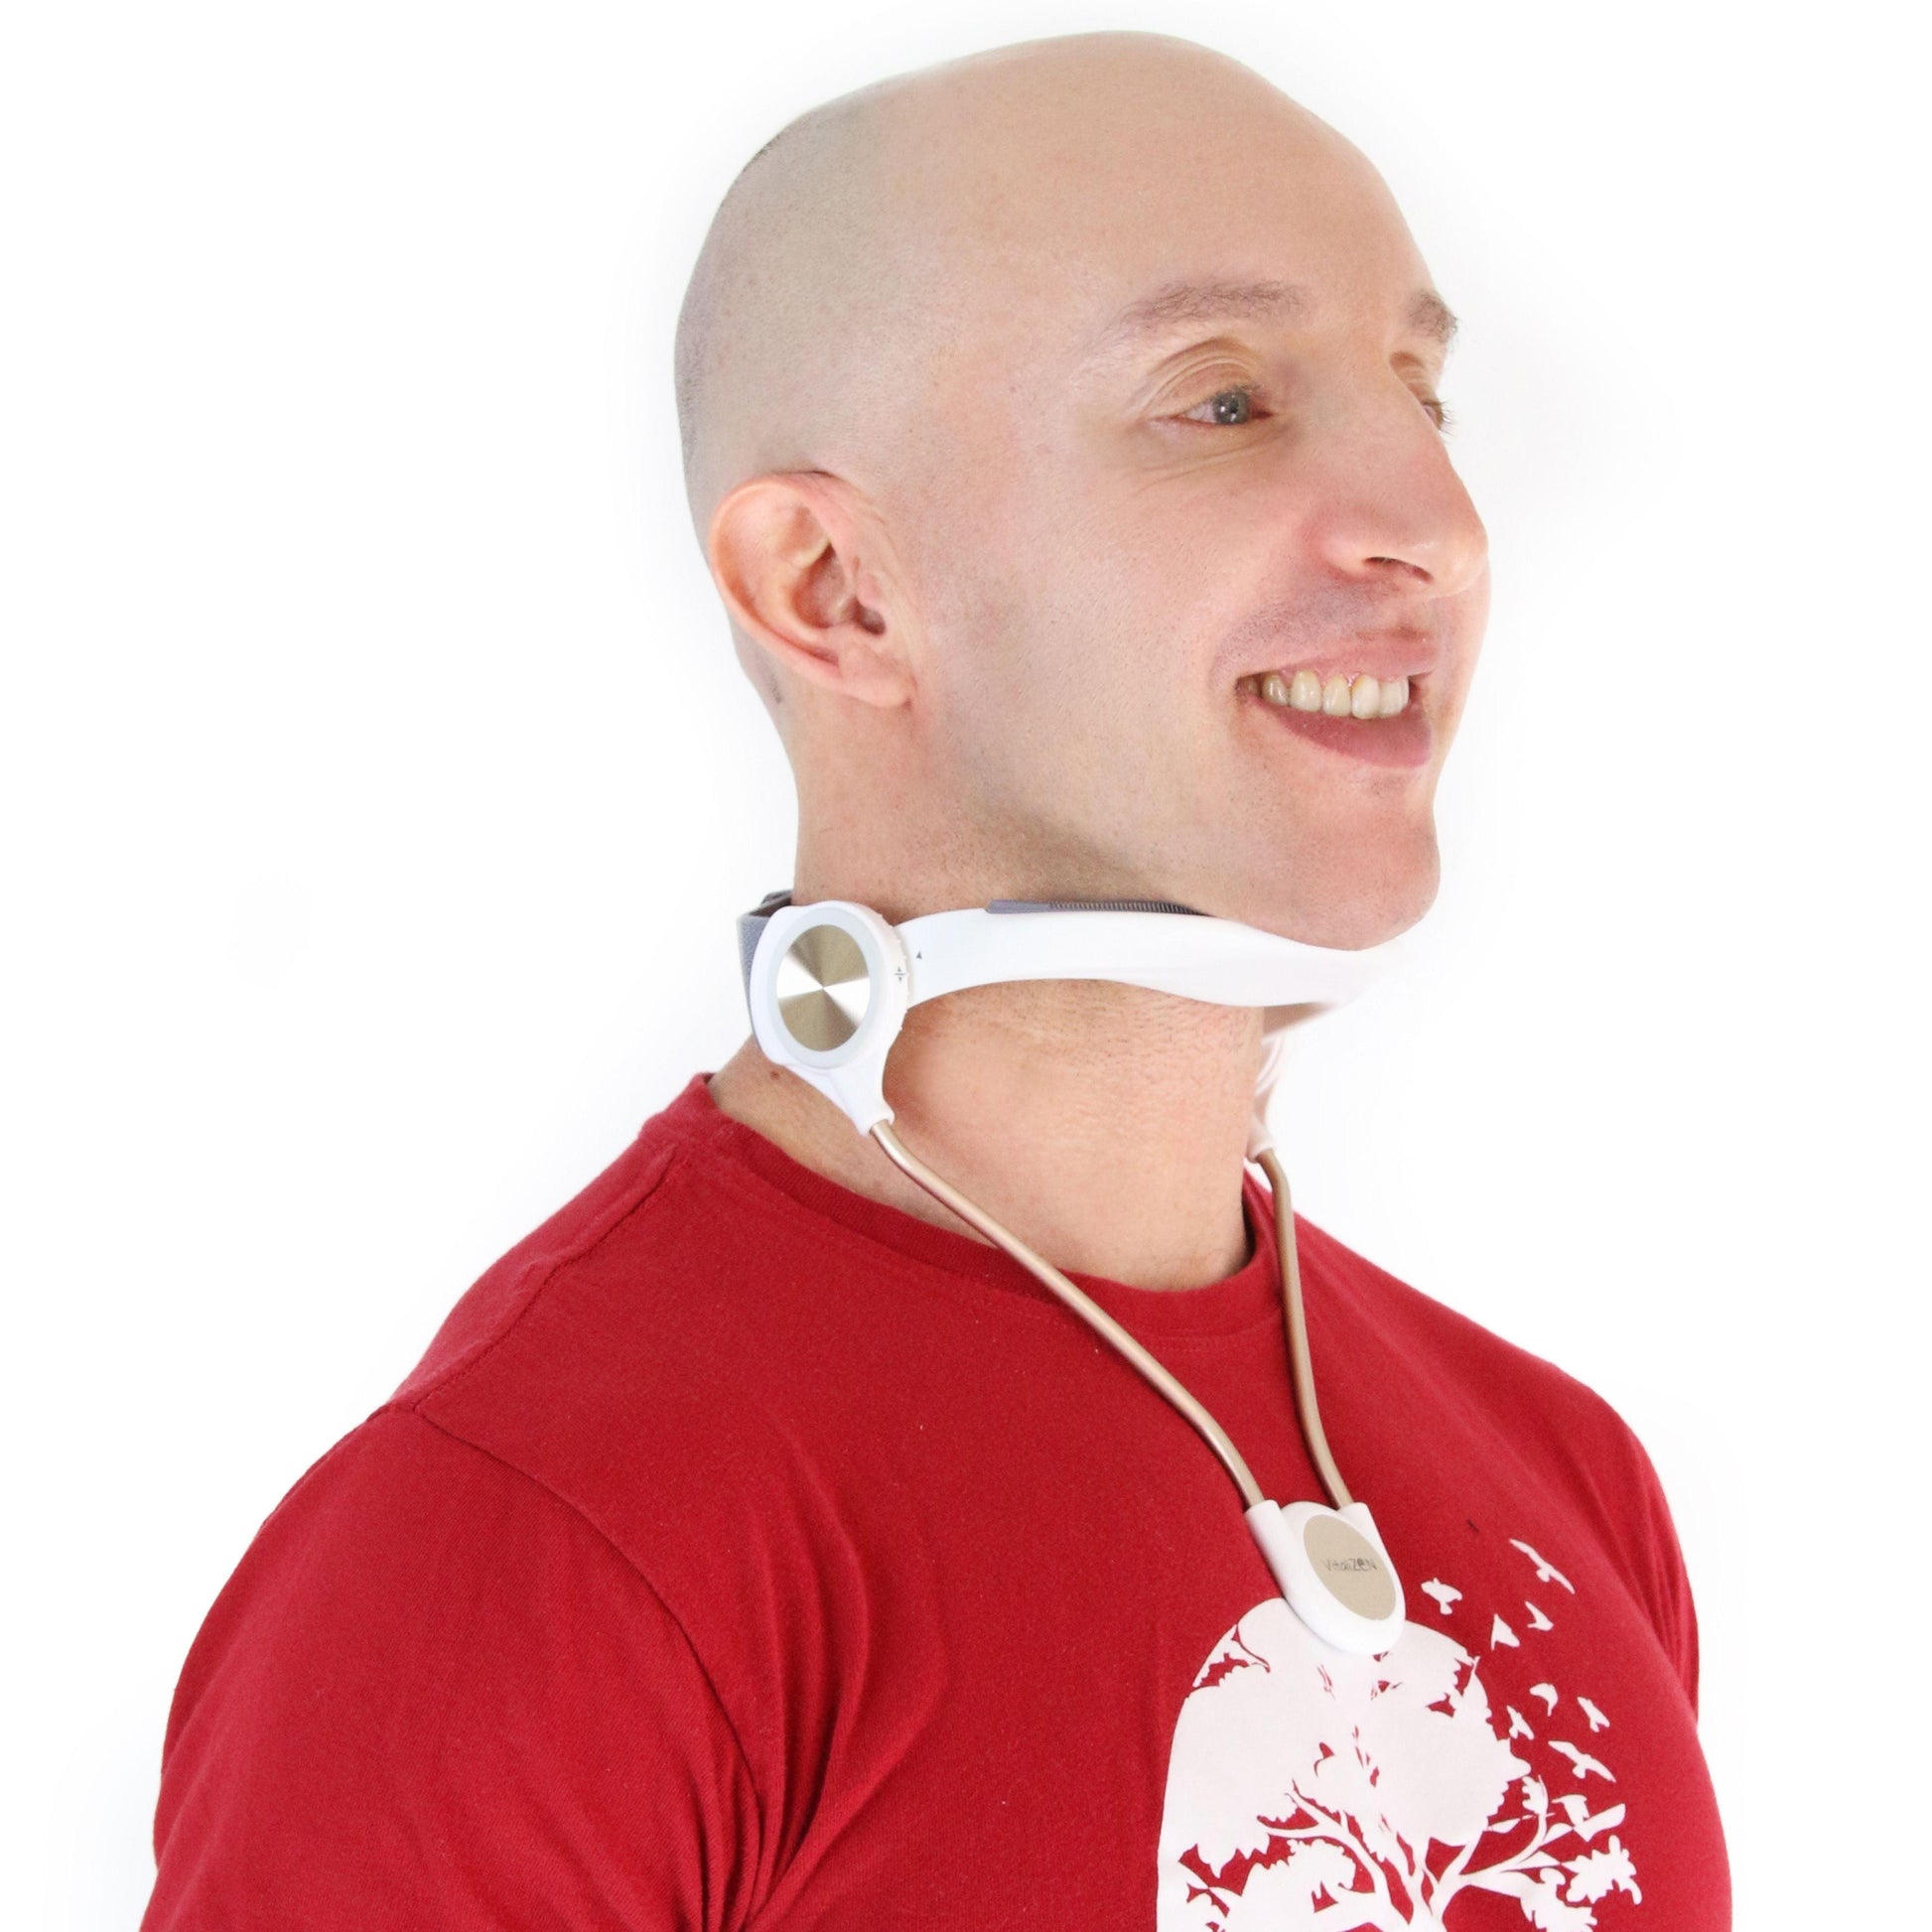 Neck Supports  Health and Care